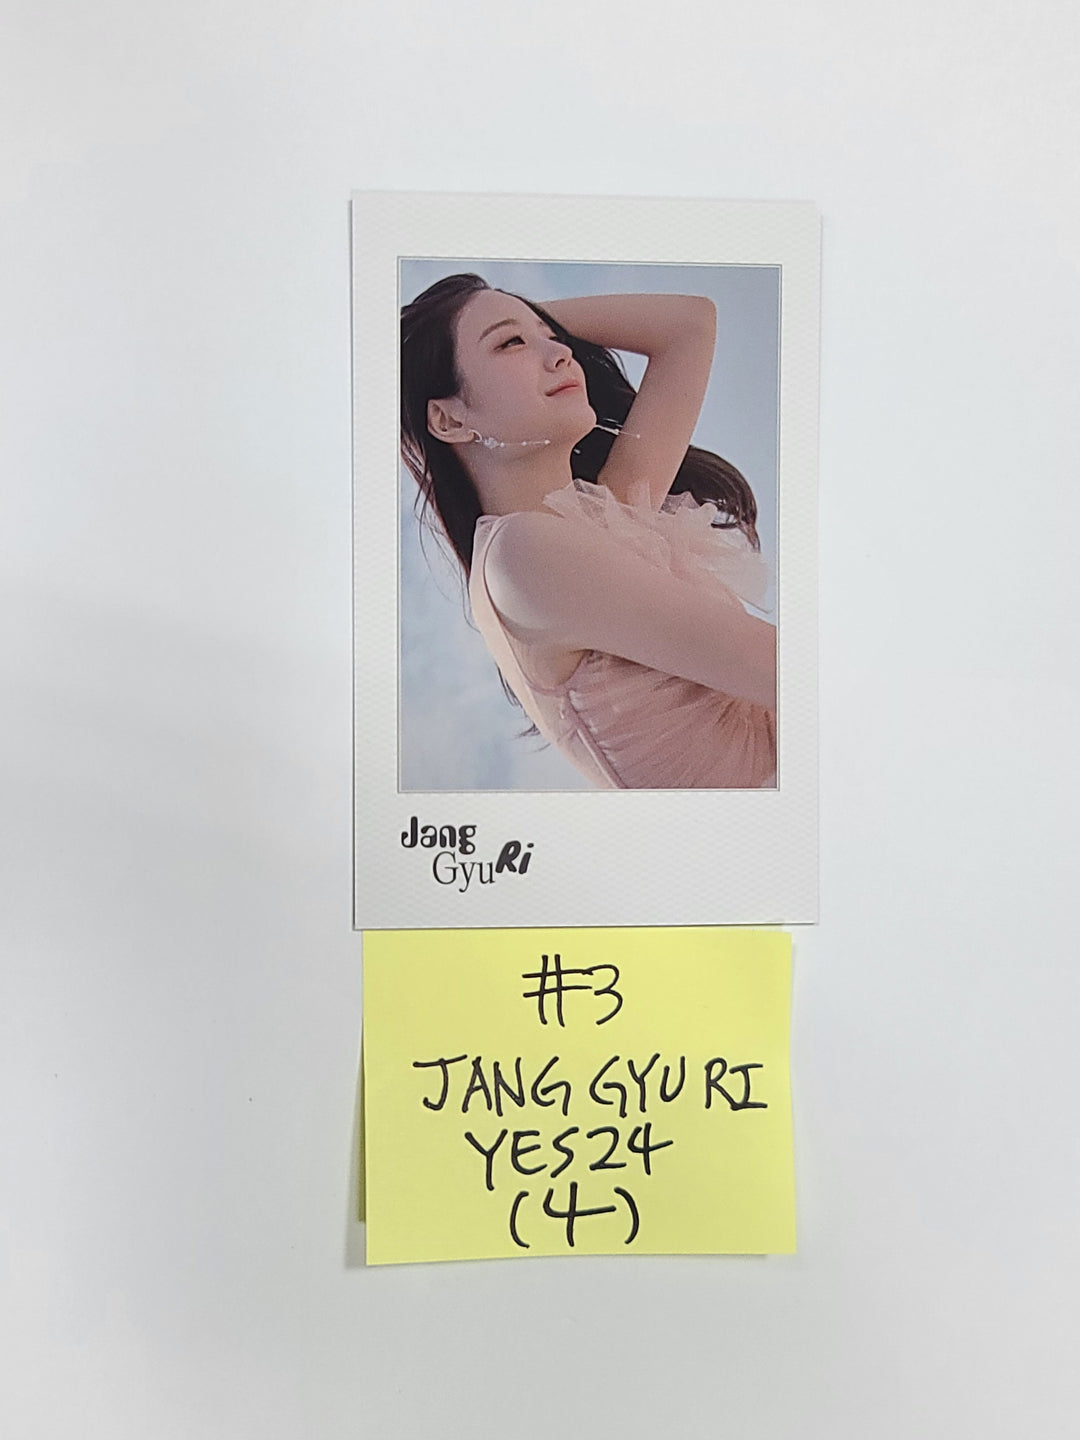 Fromis_9 "from our Memento Box" - Yes24 Pre-Order Benefit Polaroid Type Photocard